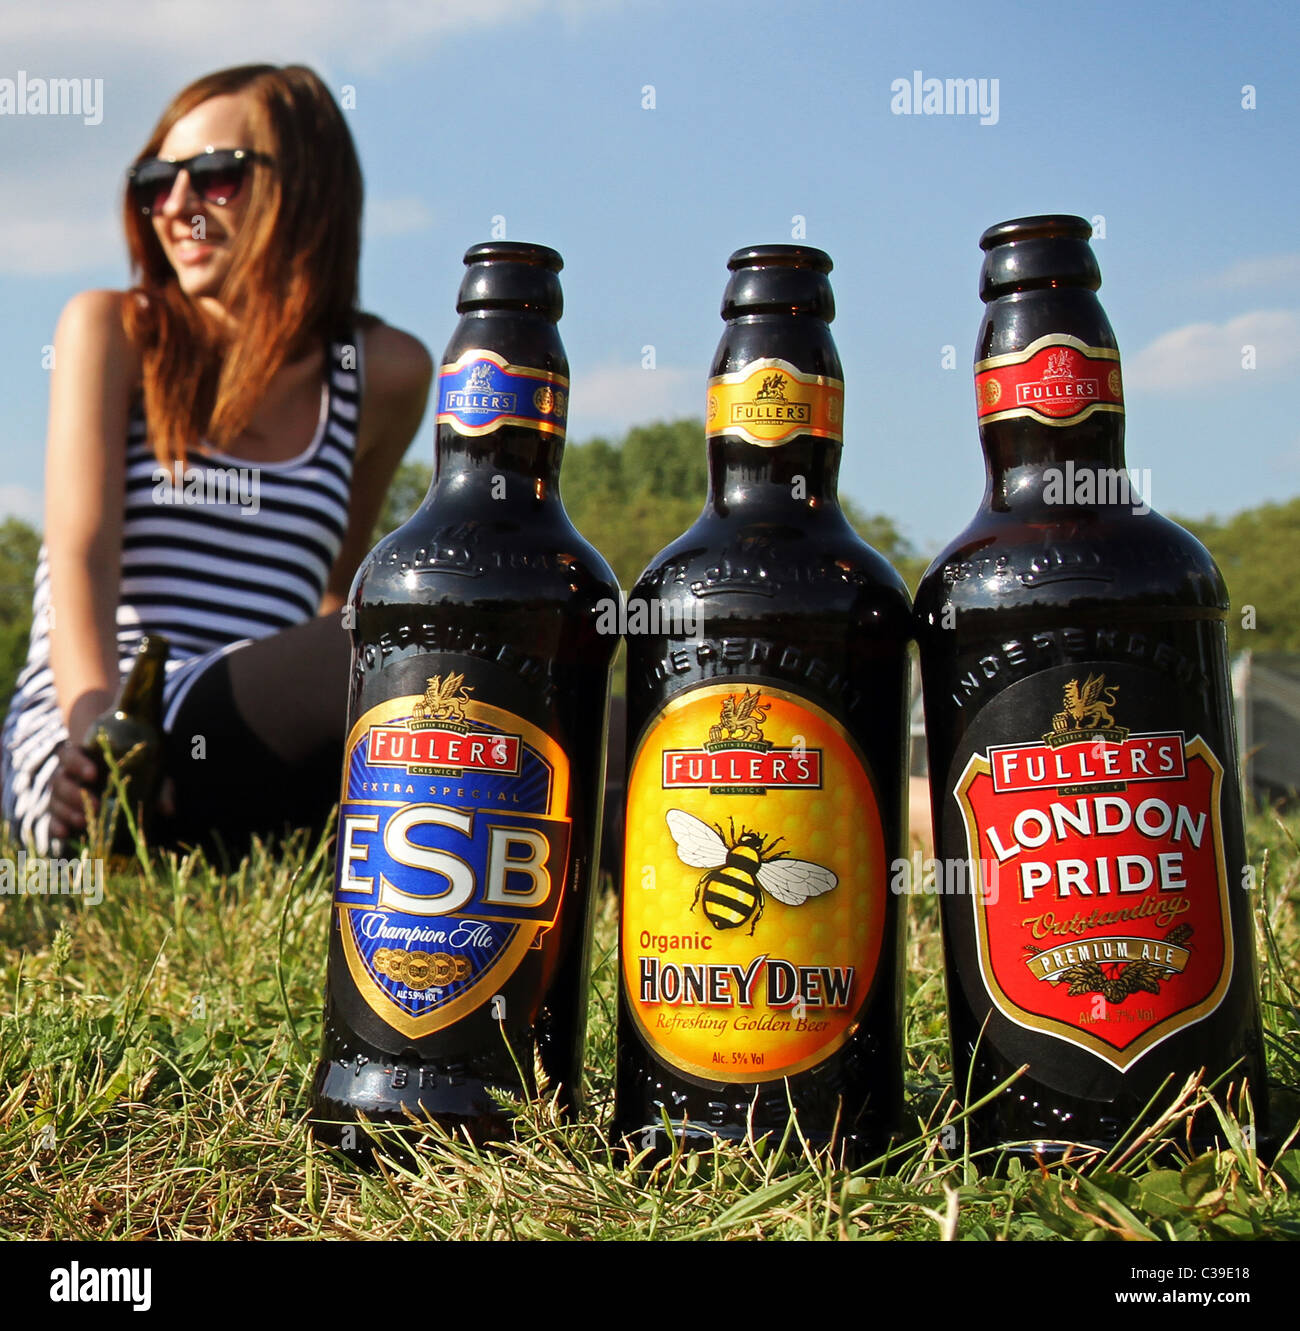 Fuller's beers being enjoyed on a sunny day. Stock Photo